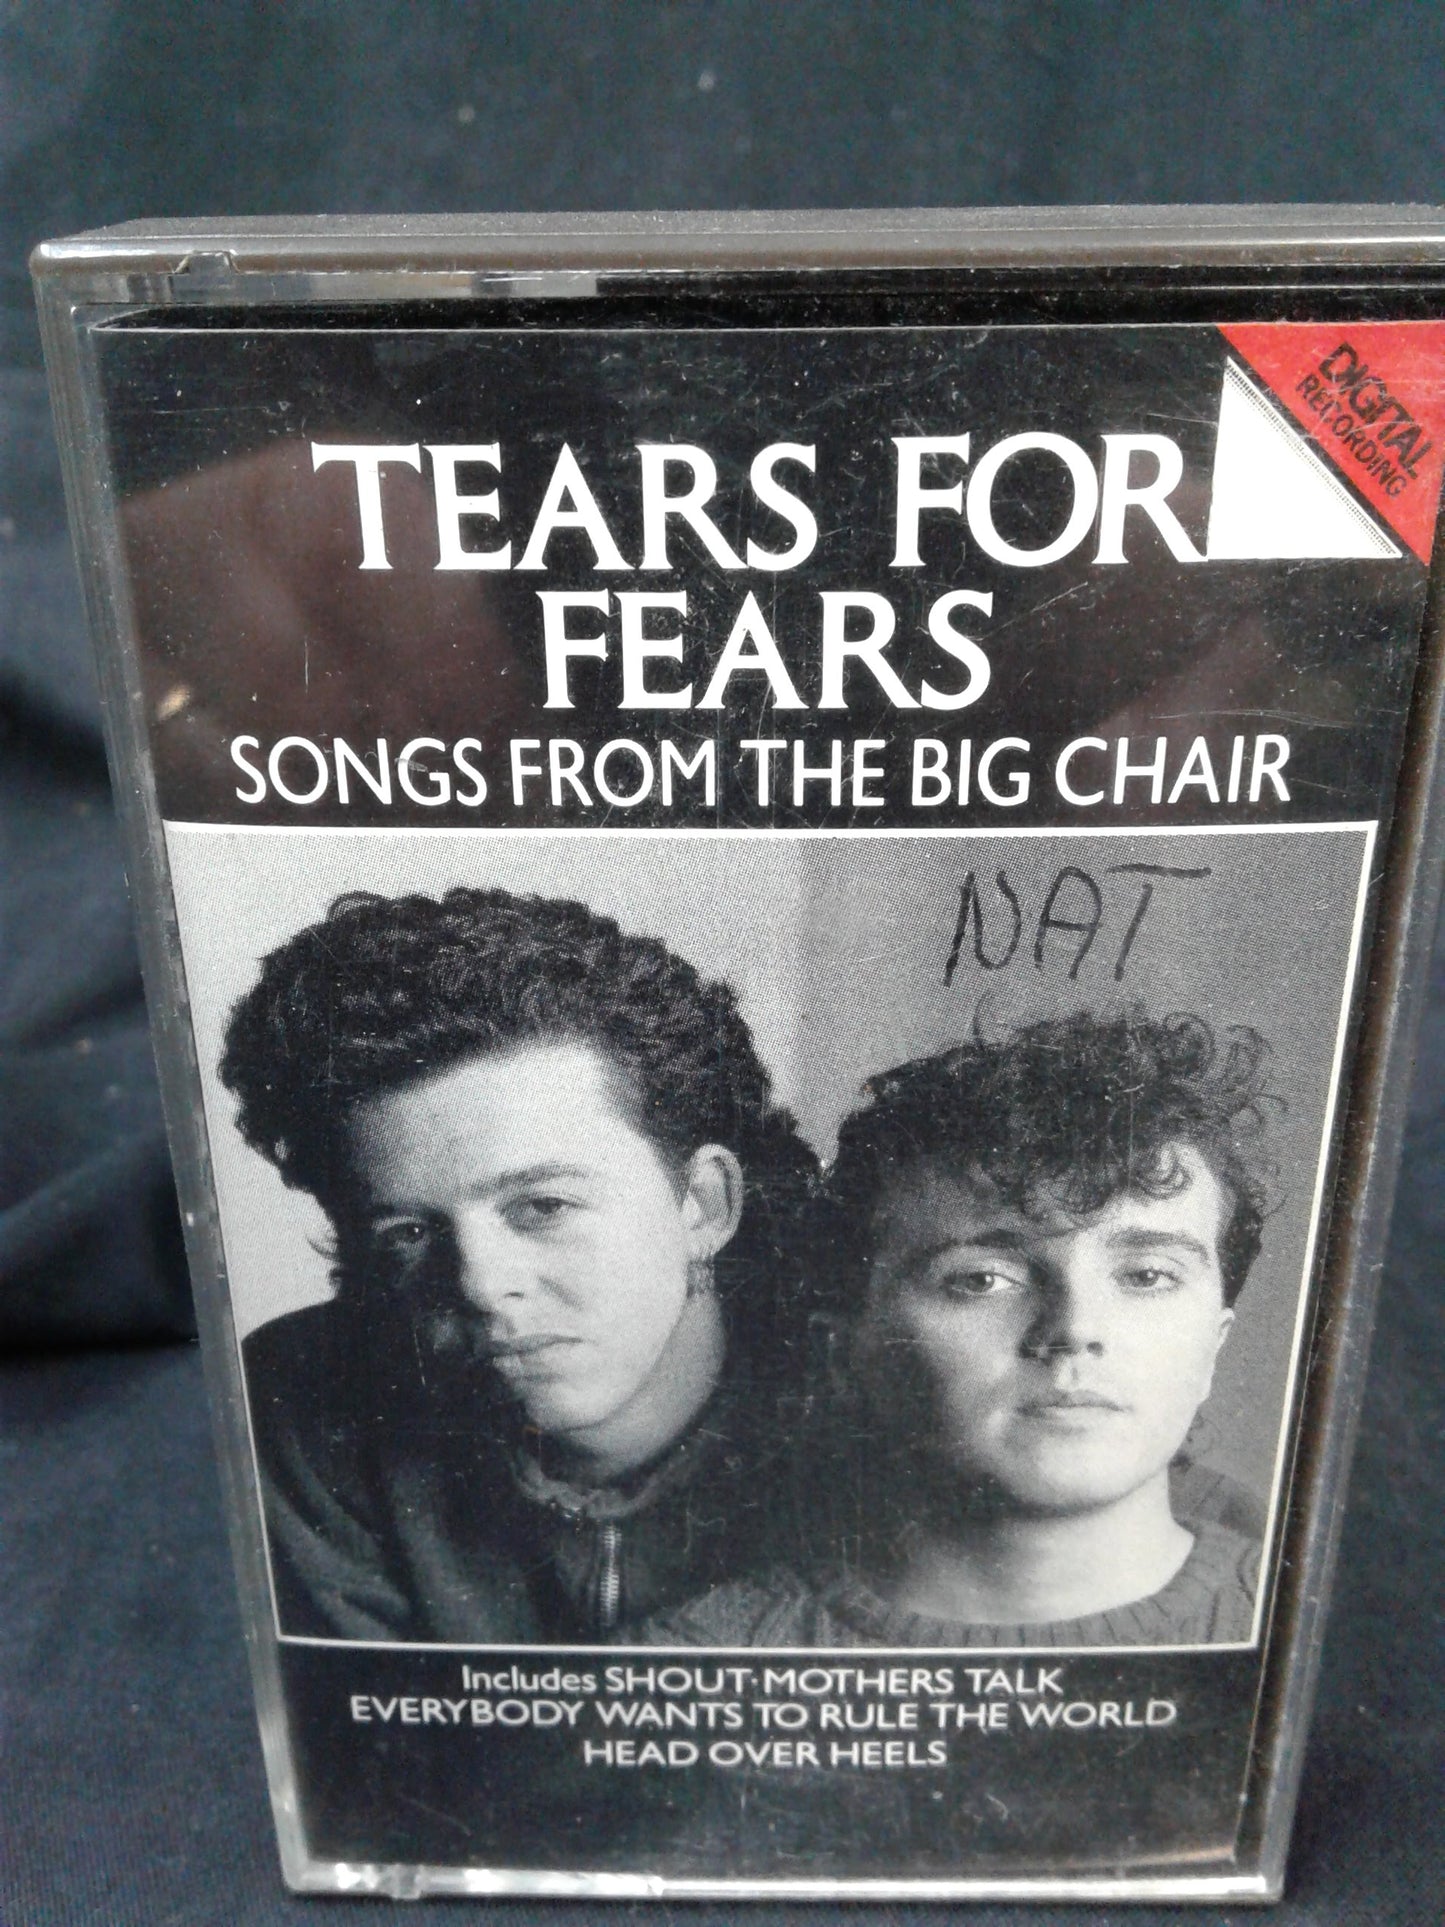 Cassette Tears for fears songs from the big chair